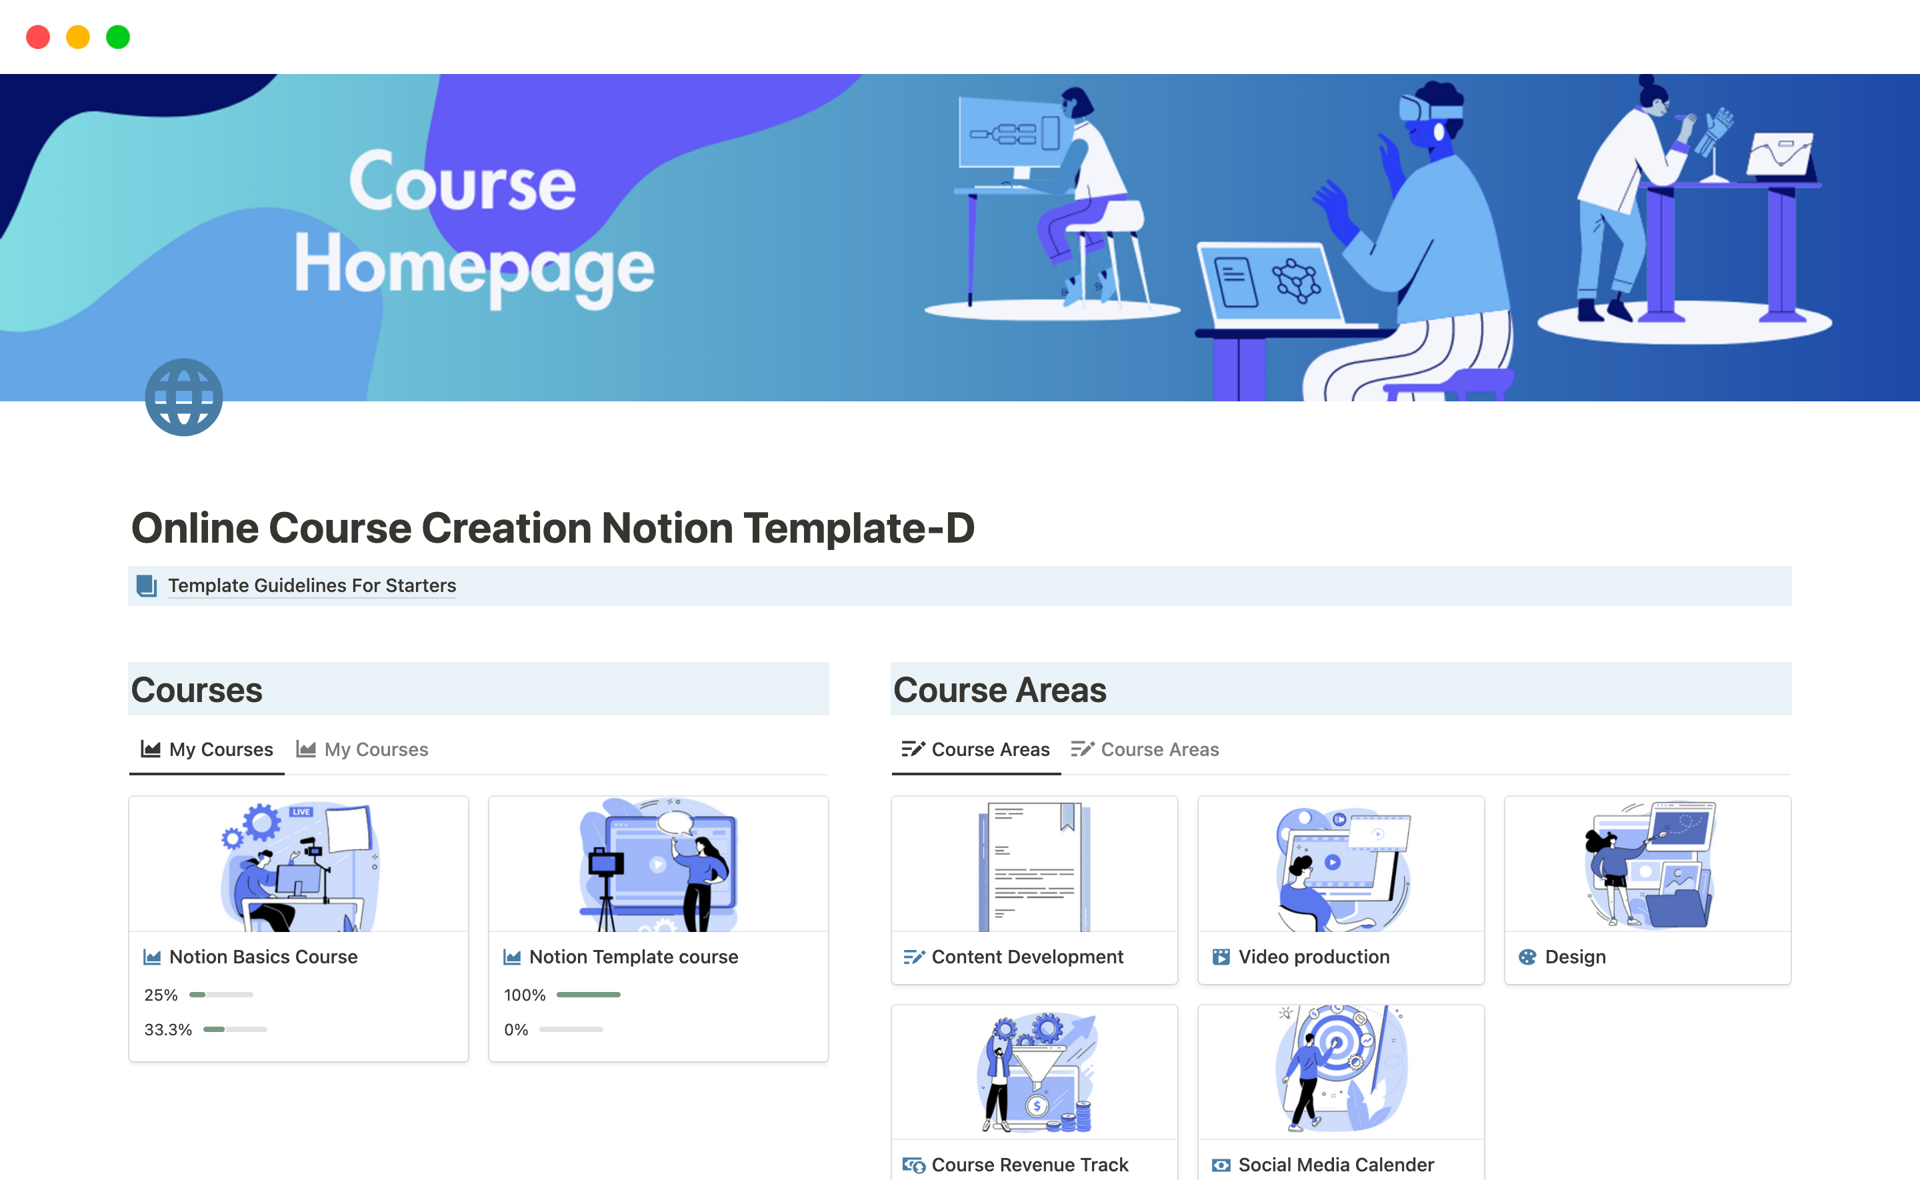 Helps you create and organize your online course creation journey. 